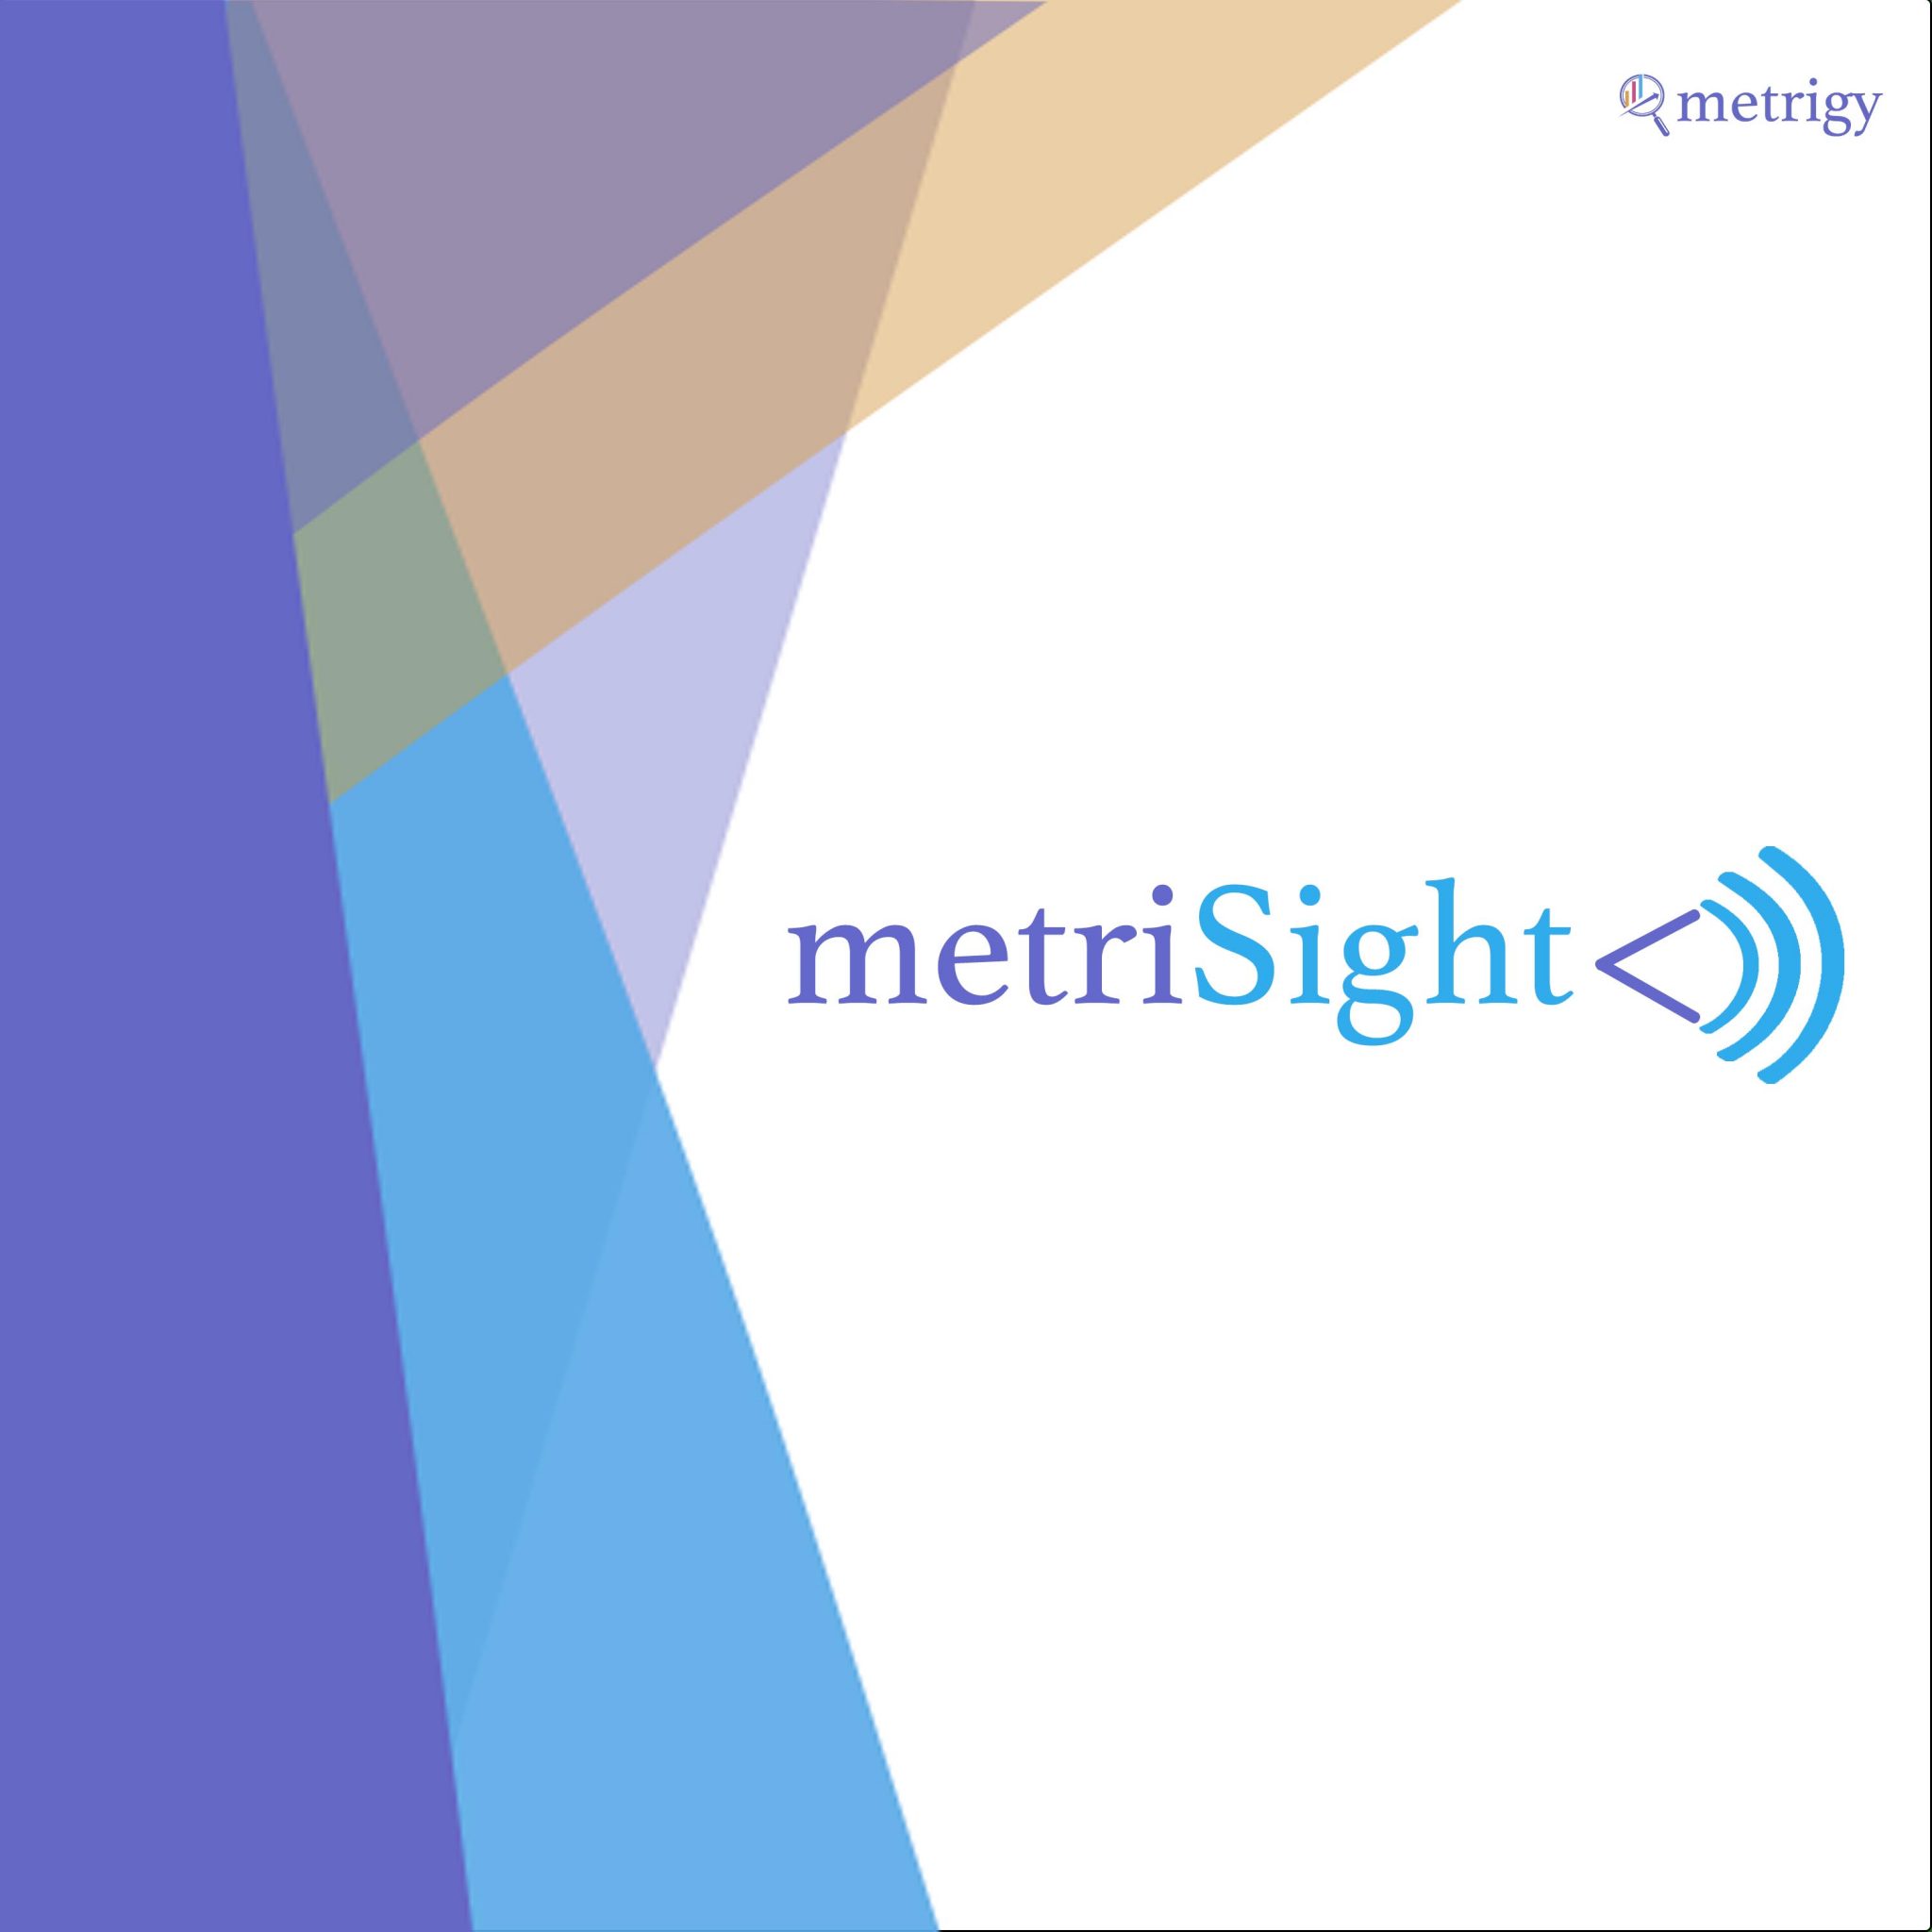 MetriSight Ep.13 - Carriers & CCaaS: What's the Value-Add?